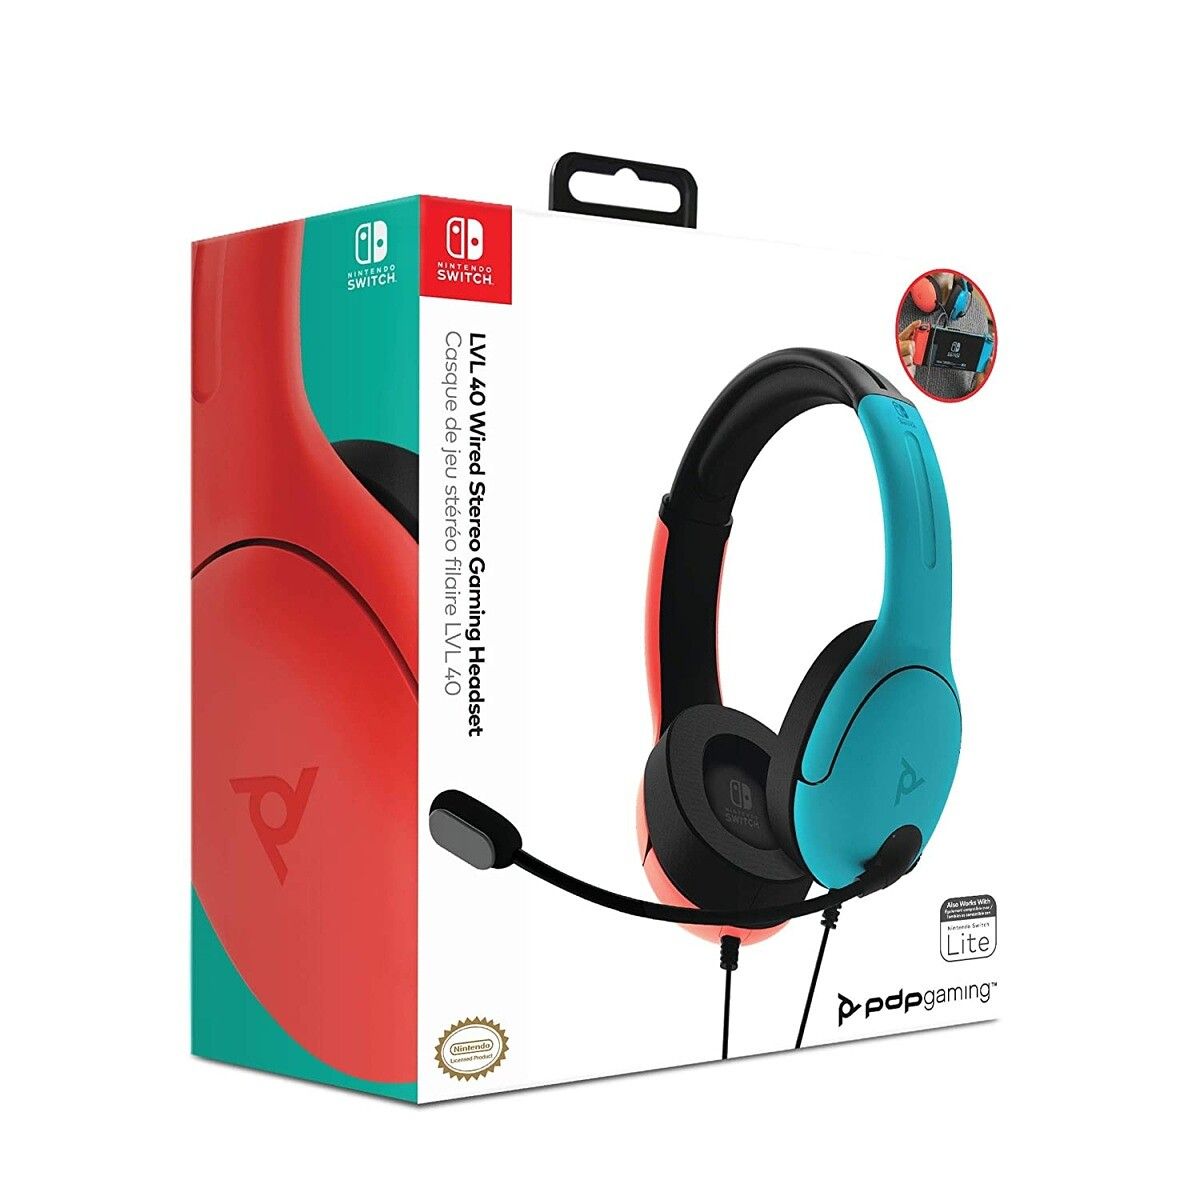 You can never go wrong with officially licensed gear. The PDP Switch gaming headset does everything you need it to do for the Switch's handheld mode, and the color scheme will match your Neon Switch.